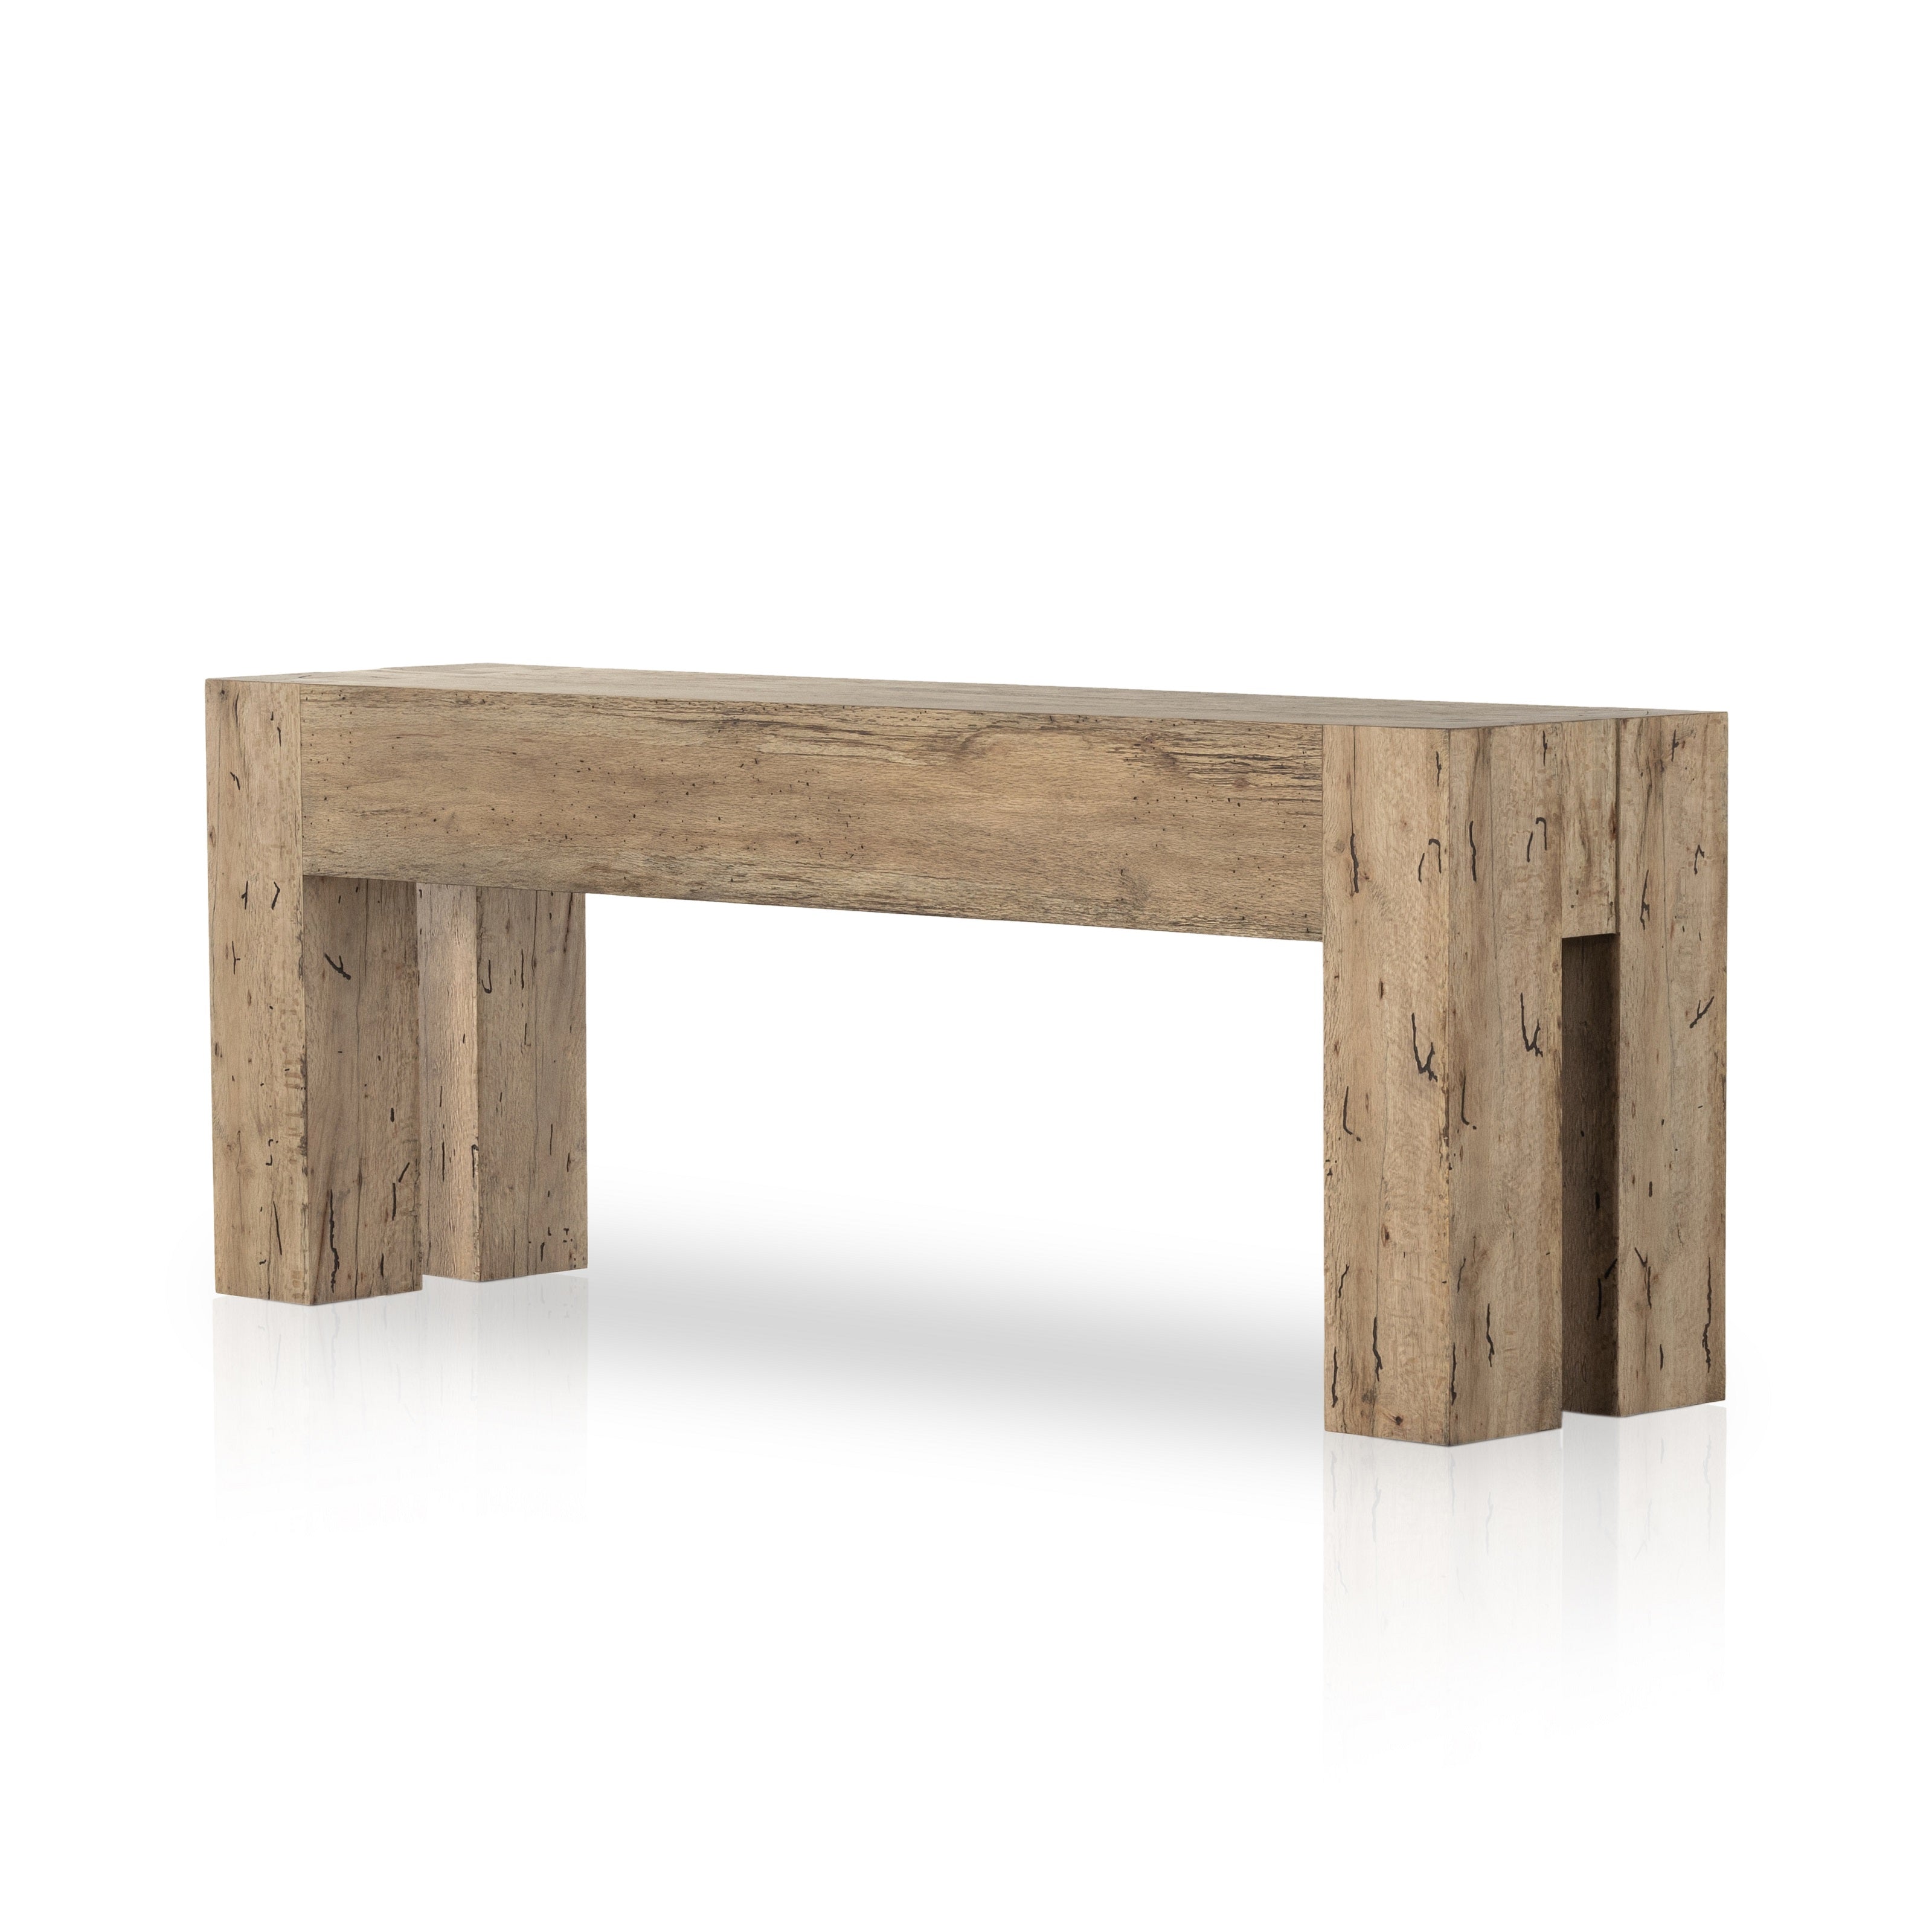 Made from thick-cut oak veneer with a faux rustic finish made to emulate wormwood, this Abaso Rustic Wormwood Oak Console Table features chunky squared legs and dovetail joinery detailing. Amethyst Home provides interior design services, furniture, rugs, and lighting in the Monterey metro area.